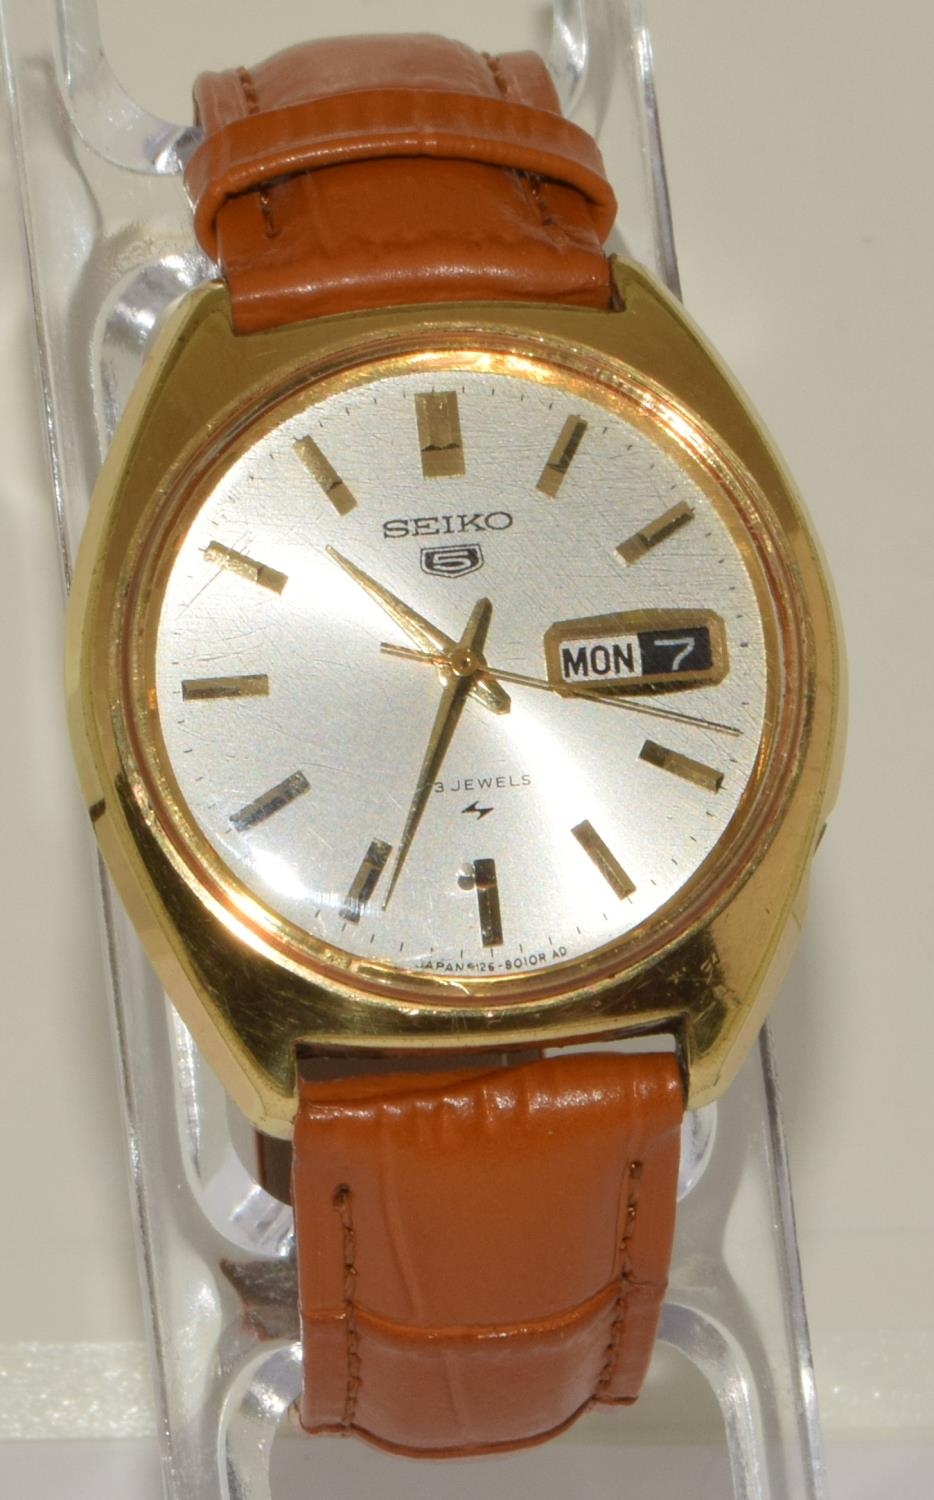 Seiko 5 day date watch on brown leather strap no 5126-8010, serial no. dates this watch to May 1967.